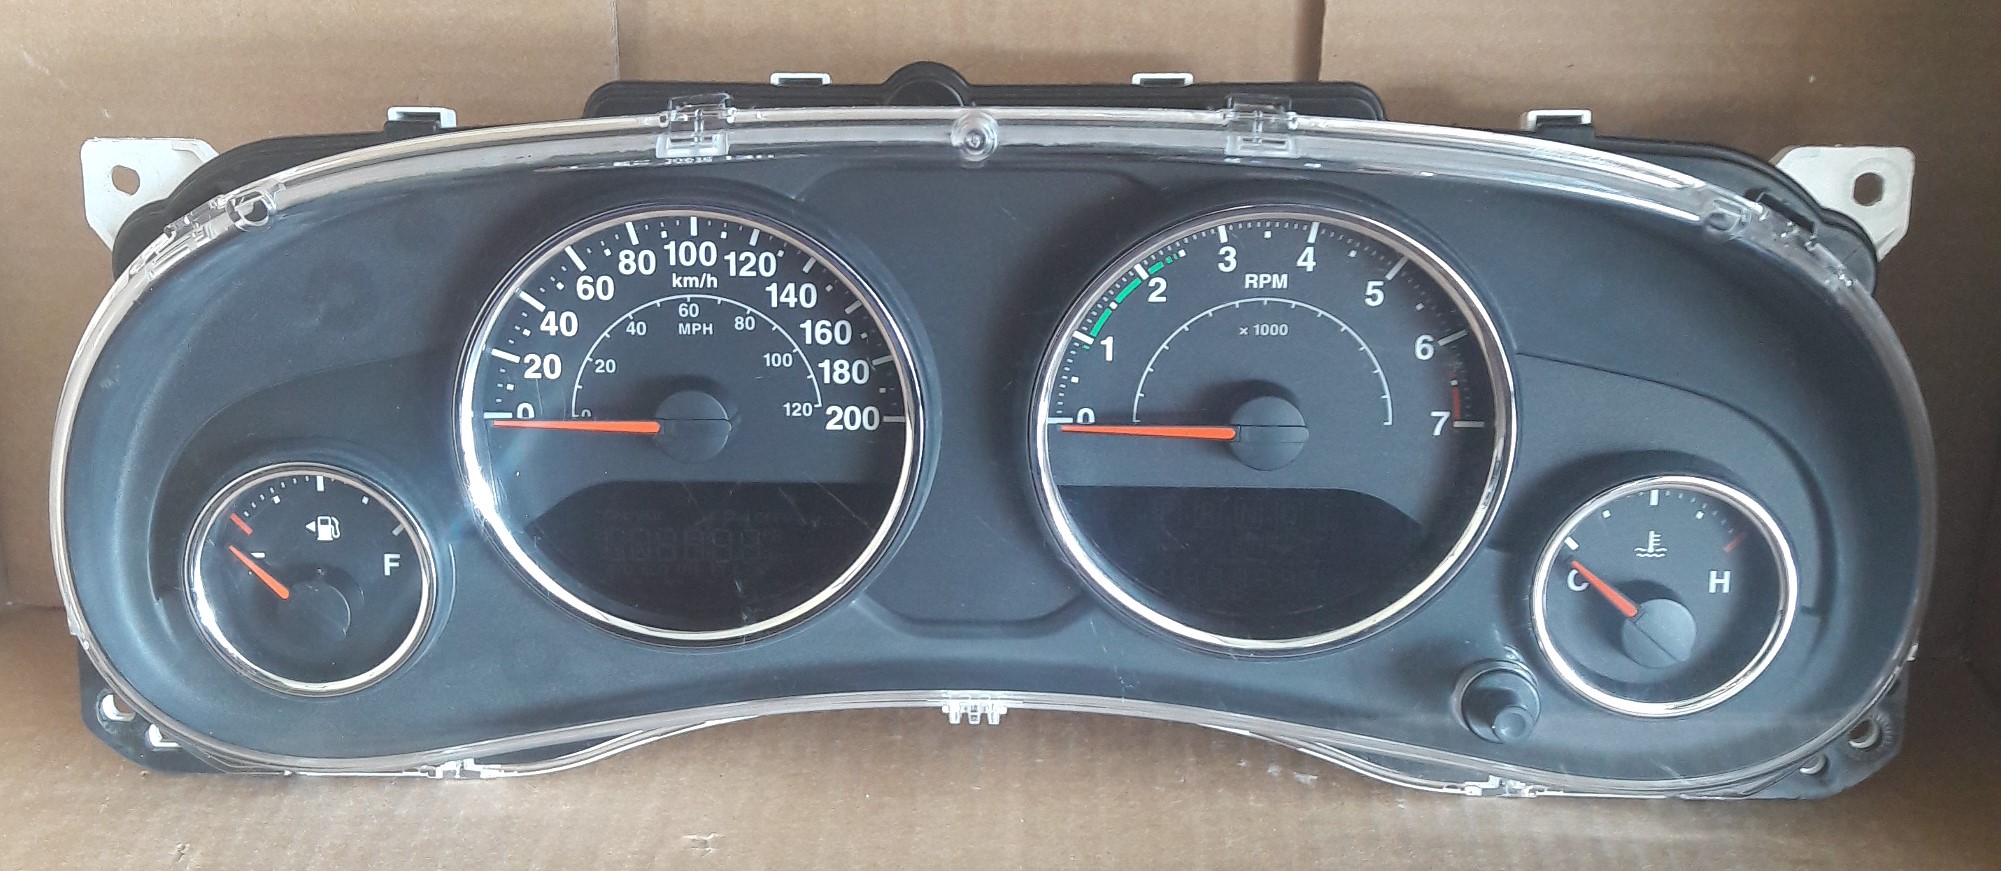 2015-2018 JEEP WRANGLER USED DASHBOARD INSTRUMENT CLUSTER FOR SALE (KM/H) -  DASHBOARD INSTRUMENT CLUSTER